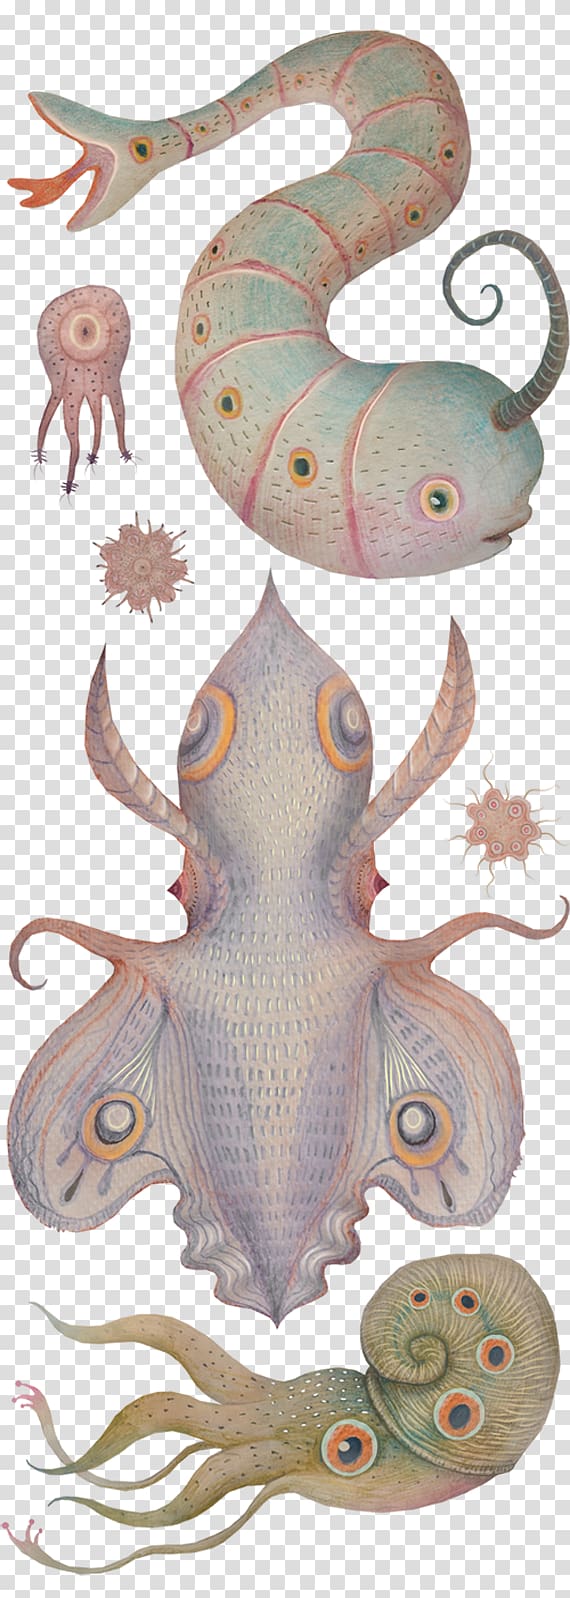 Octopus Squid Cephalopod Narwhal, nature sea animals marine microorganisms transparent background PNG clipart